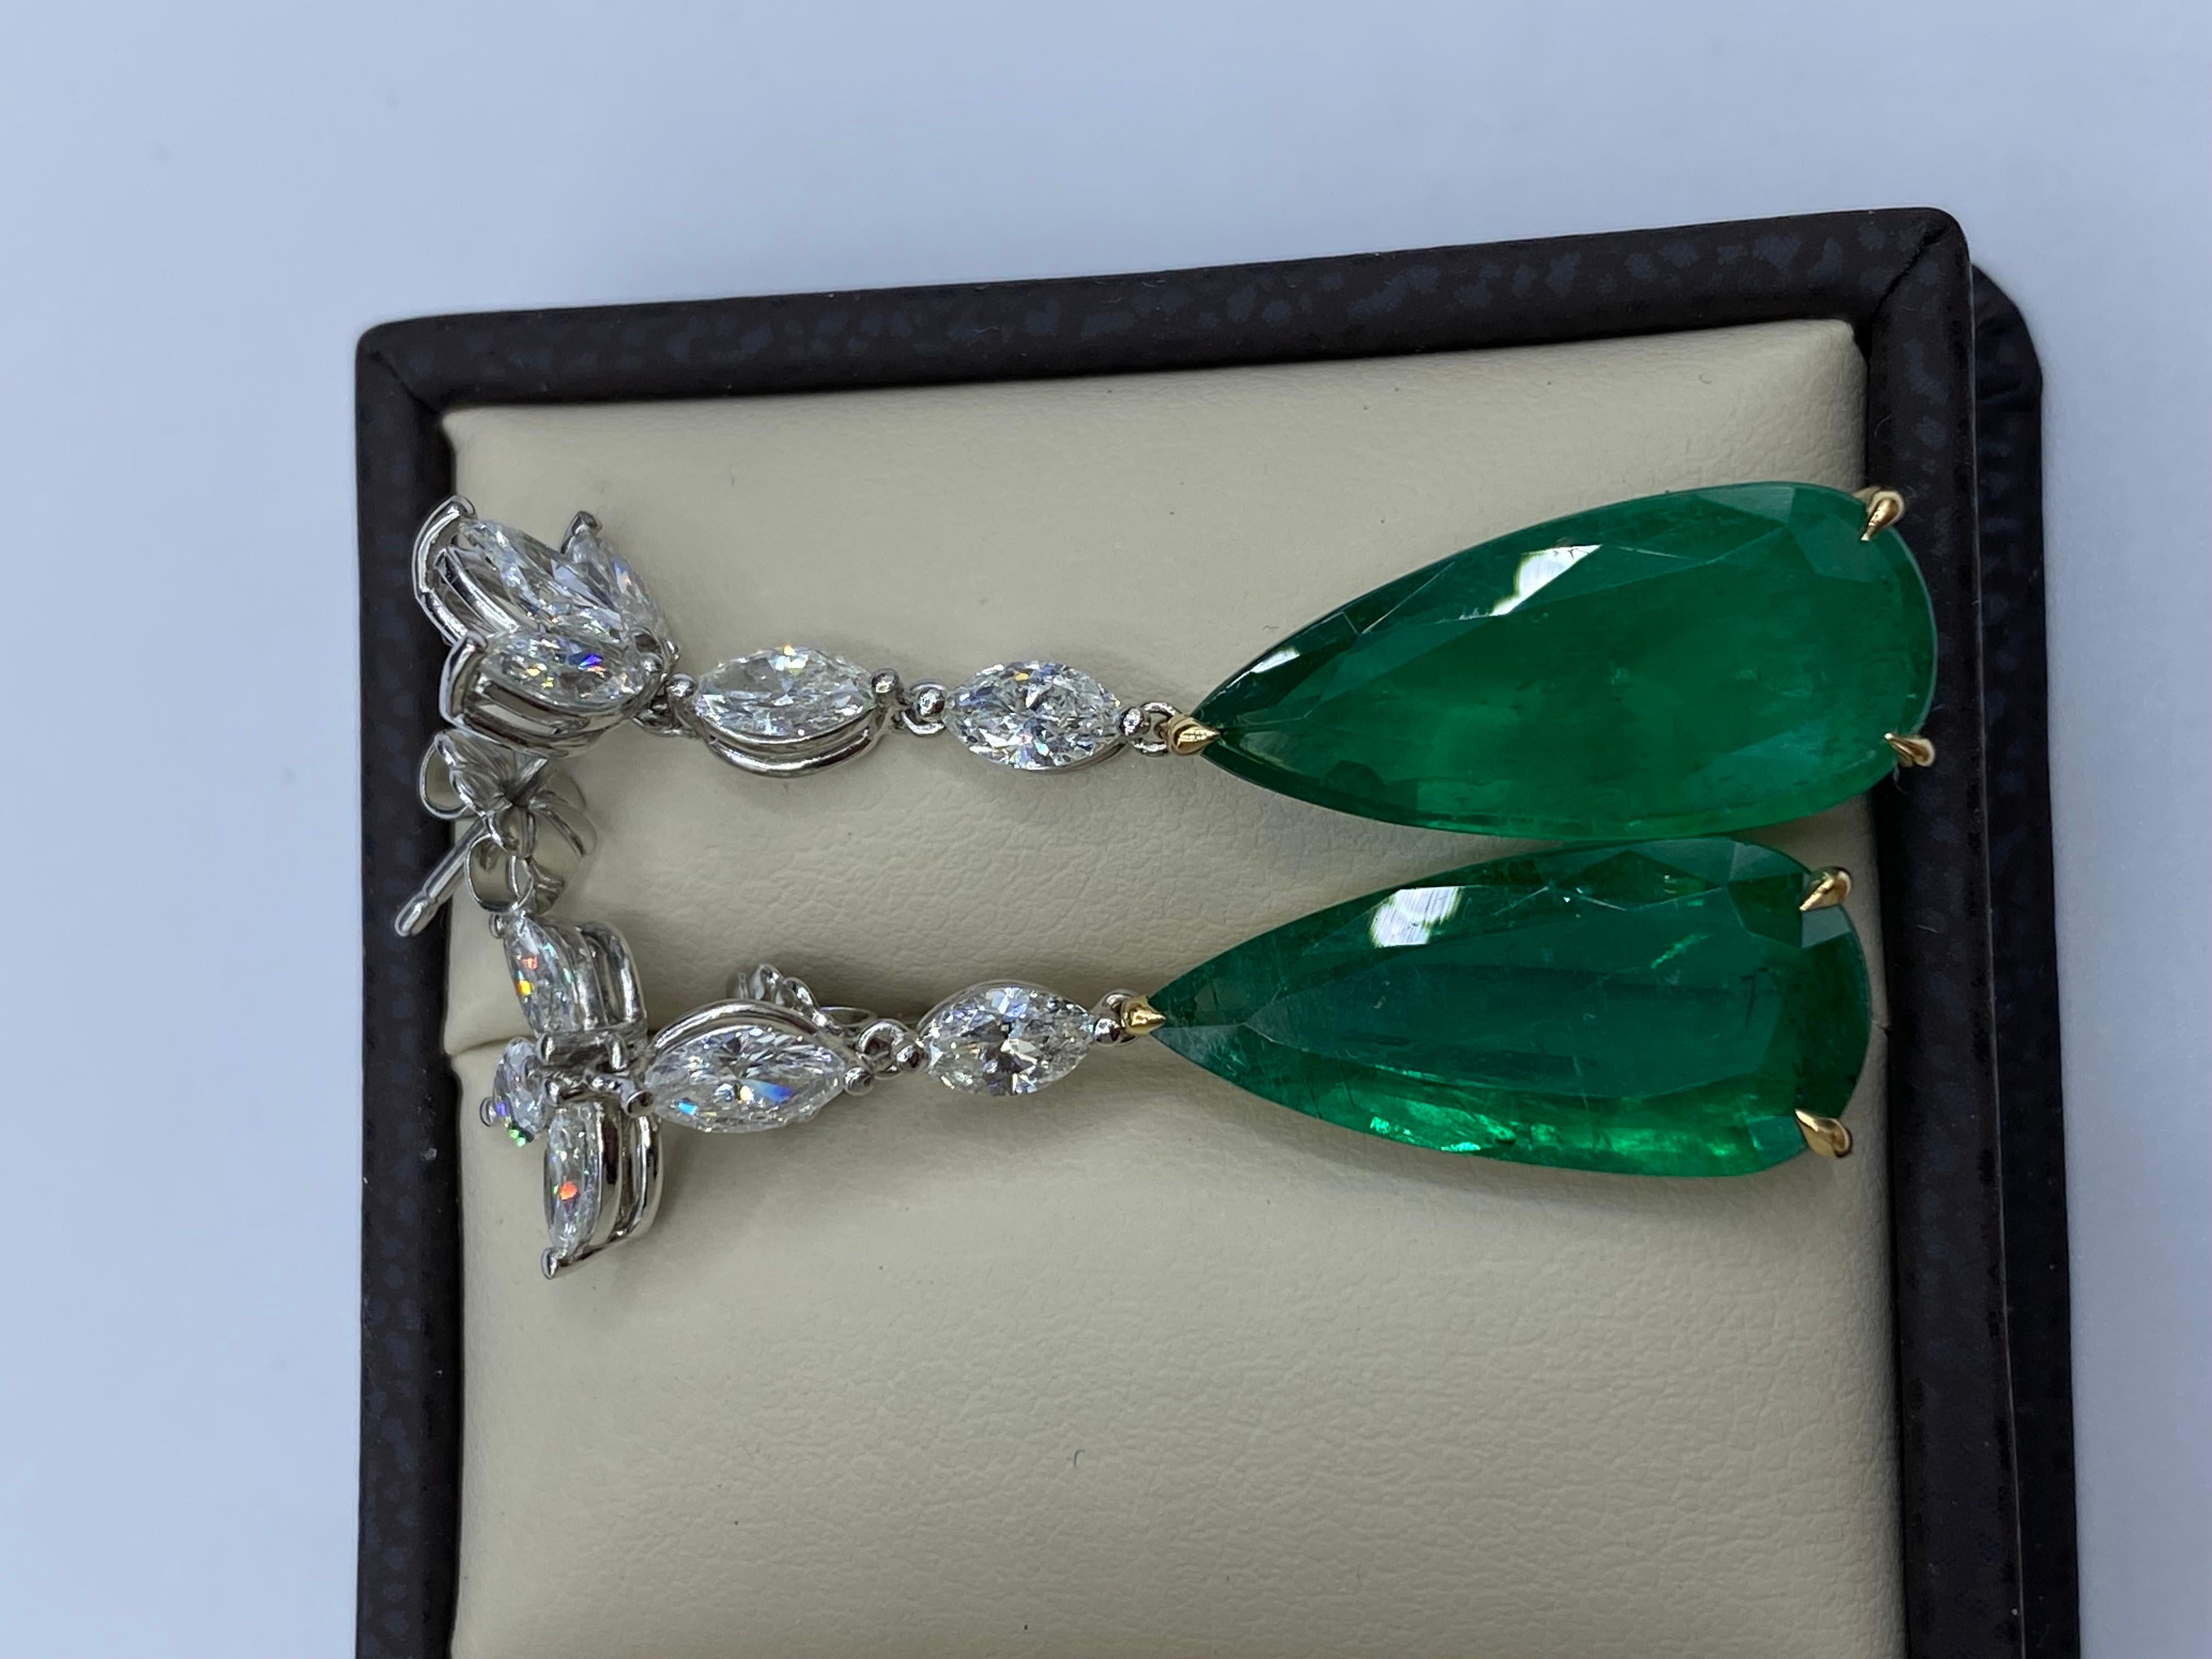 From Emilio Jewelry, a well known and respected wholesaler/dealer located on New York’s iconic Fifth Avenue, 
2 gorgeous teardrop emeralds totaling 12.98 carats, are the focal point of this earring. The emeralds are not heavy at all, and give a